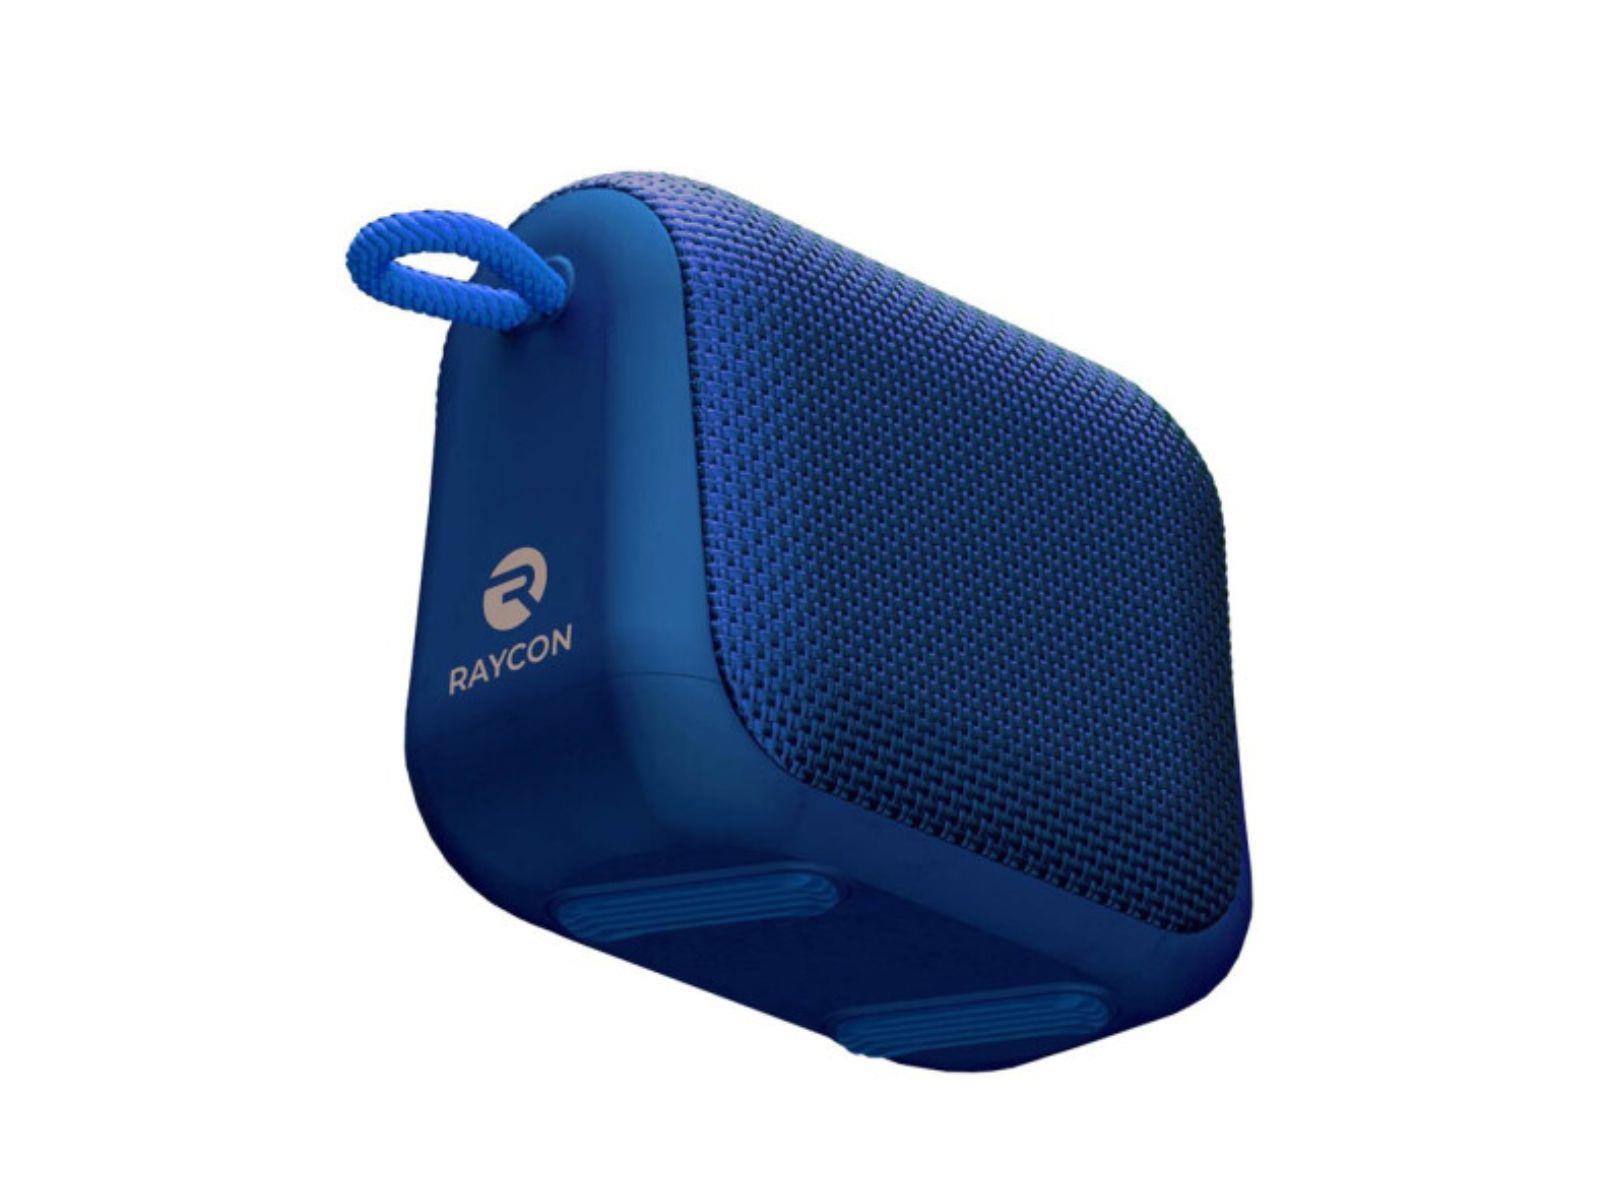 Image shows an angled view from the bottom of the blue Roaycon Everyday Bluetooth Speaker